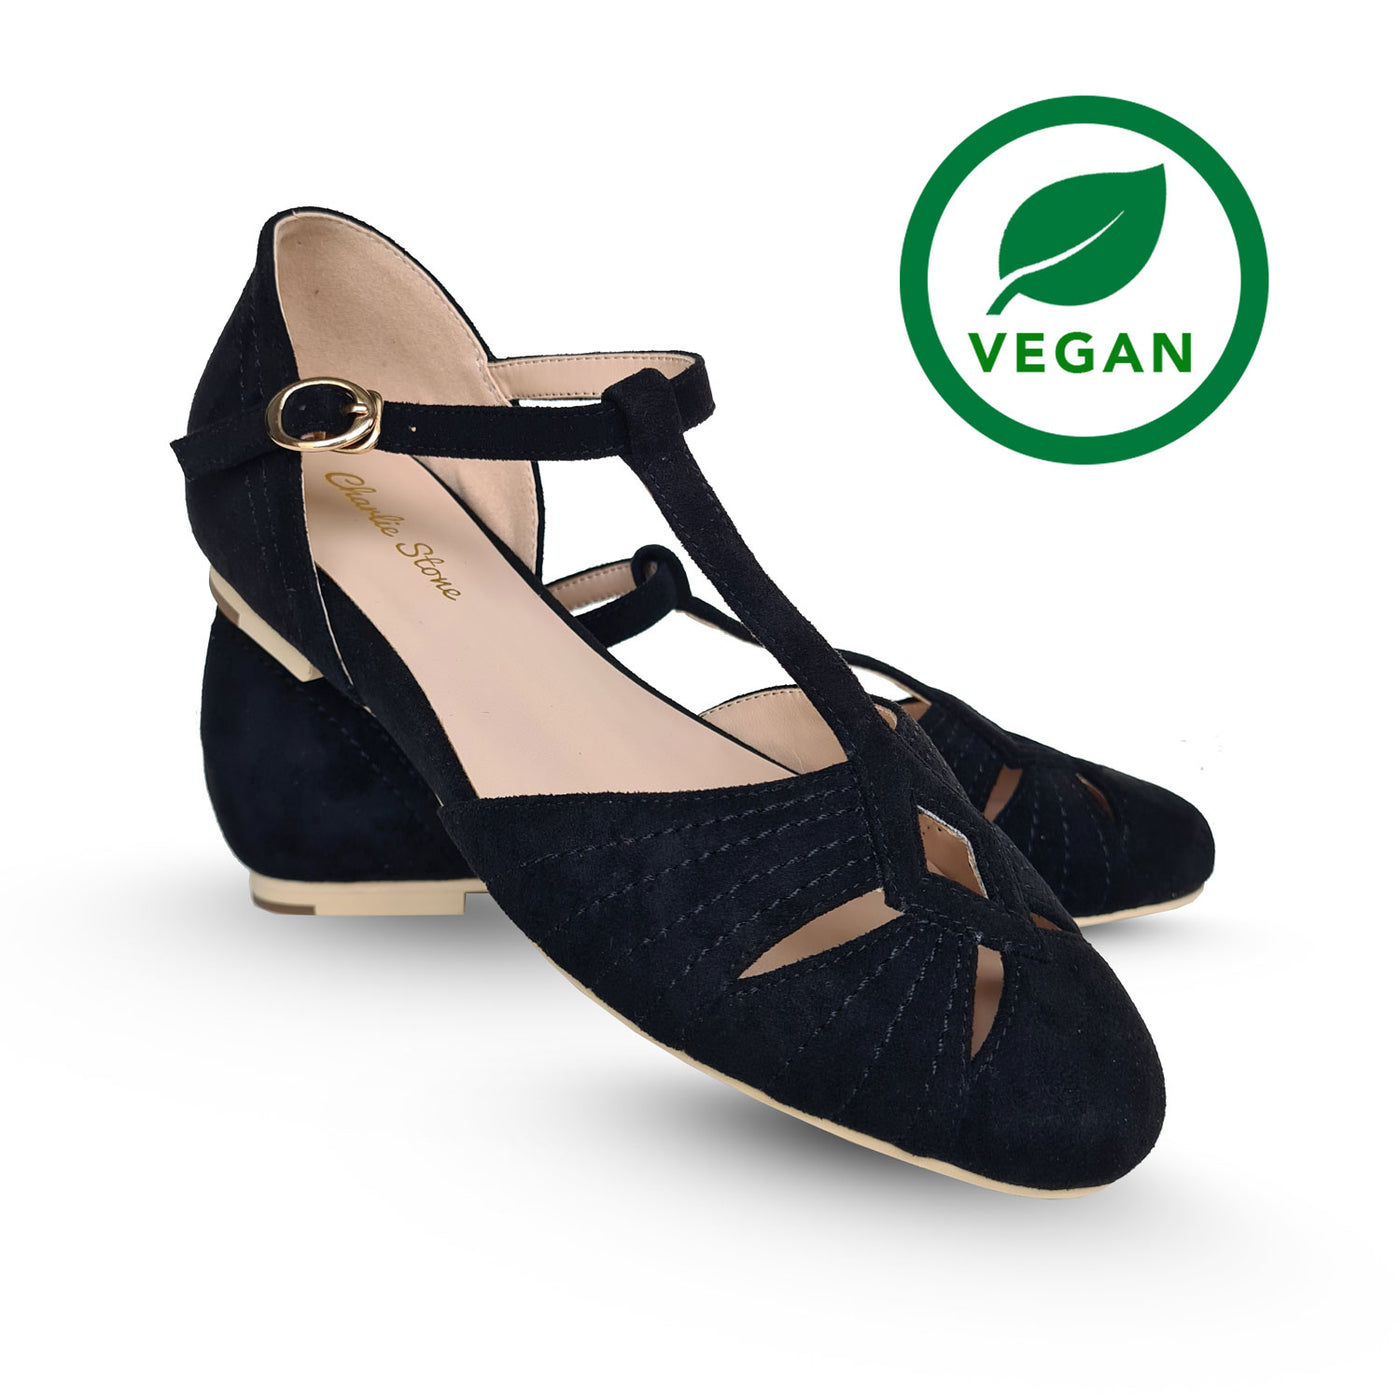 Charlie Stone Vintage Inspired Flats Retro 1940’s 1950’s Style Ladies Shoes black suede vegan